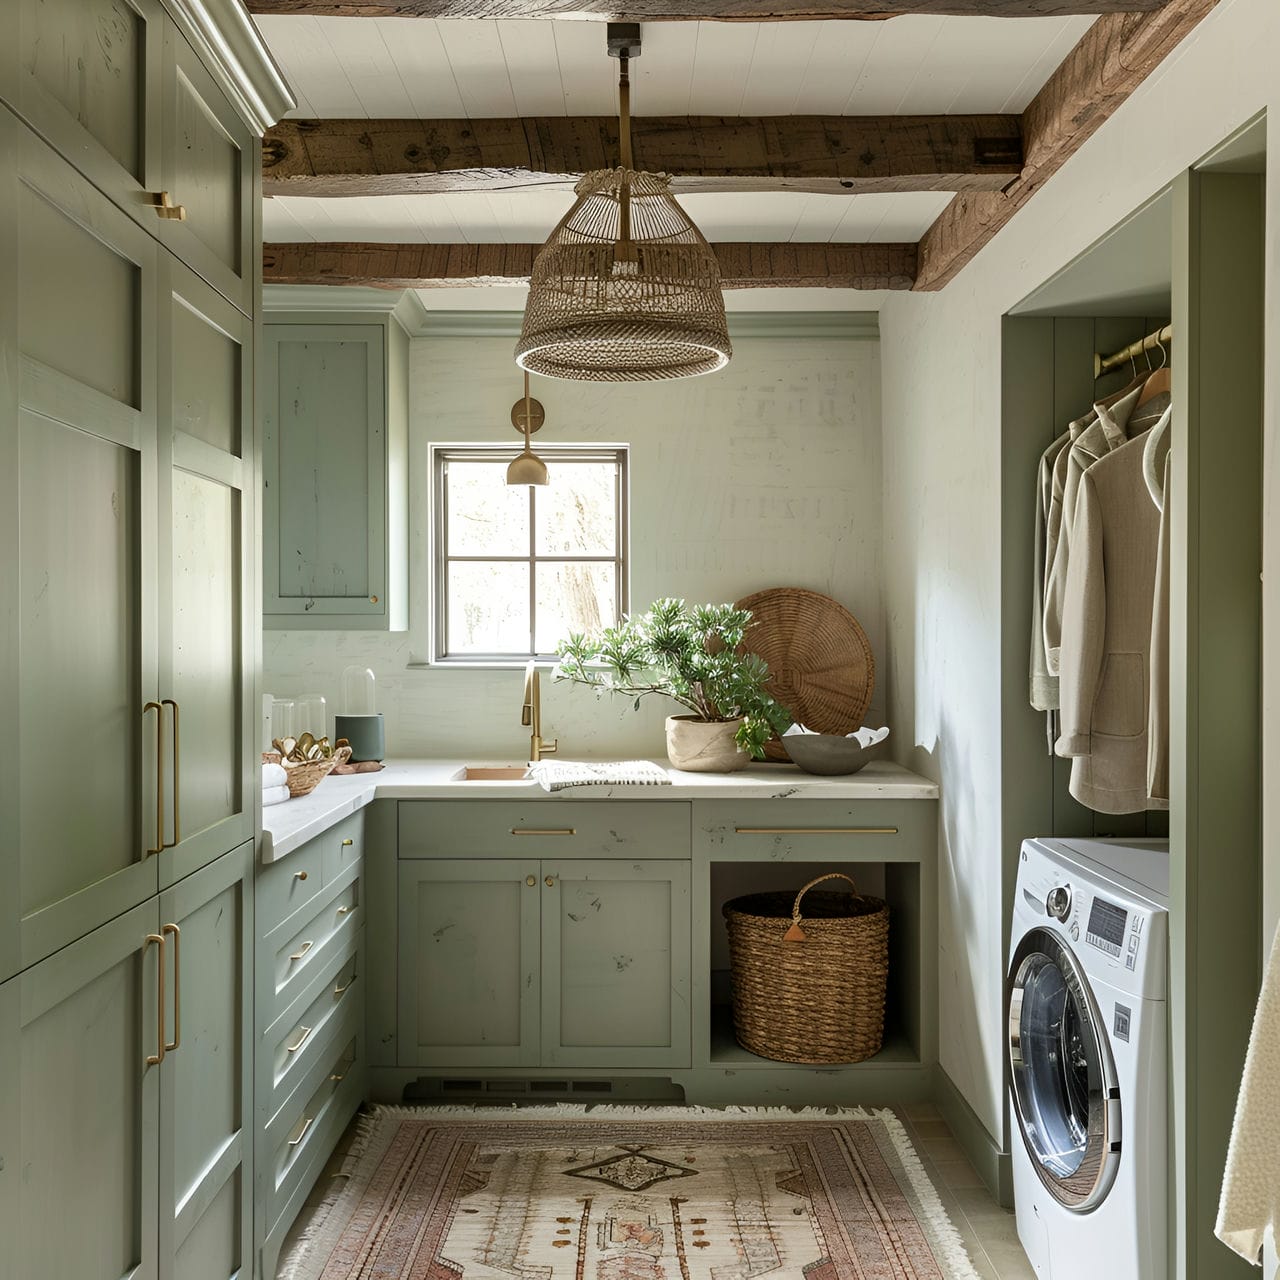 Laundry room: size, functionality, uses, furniture and renovation